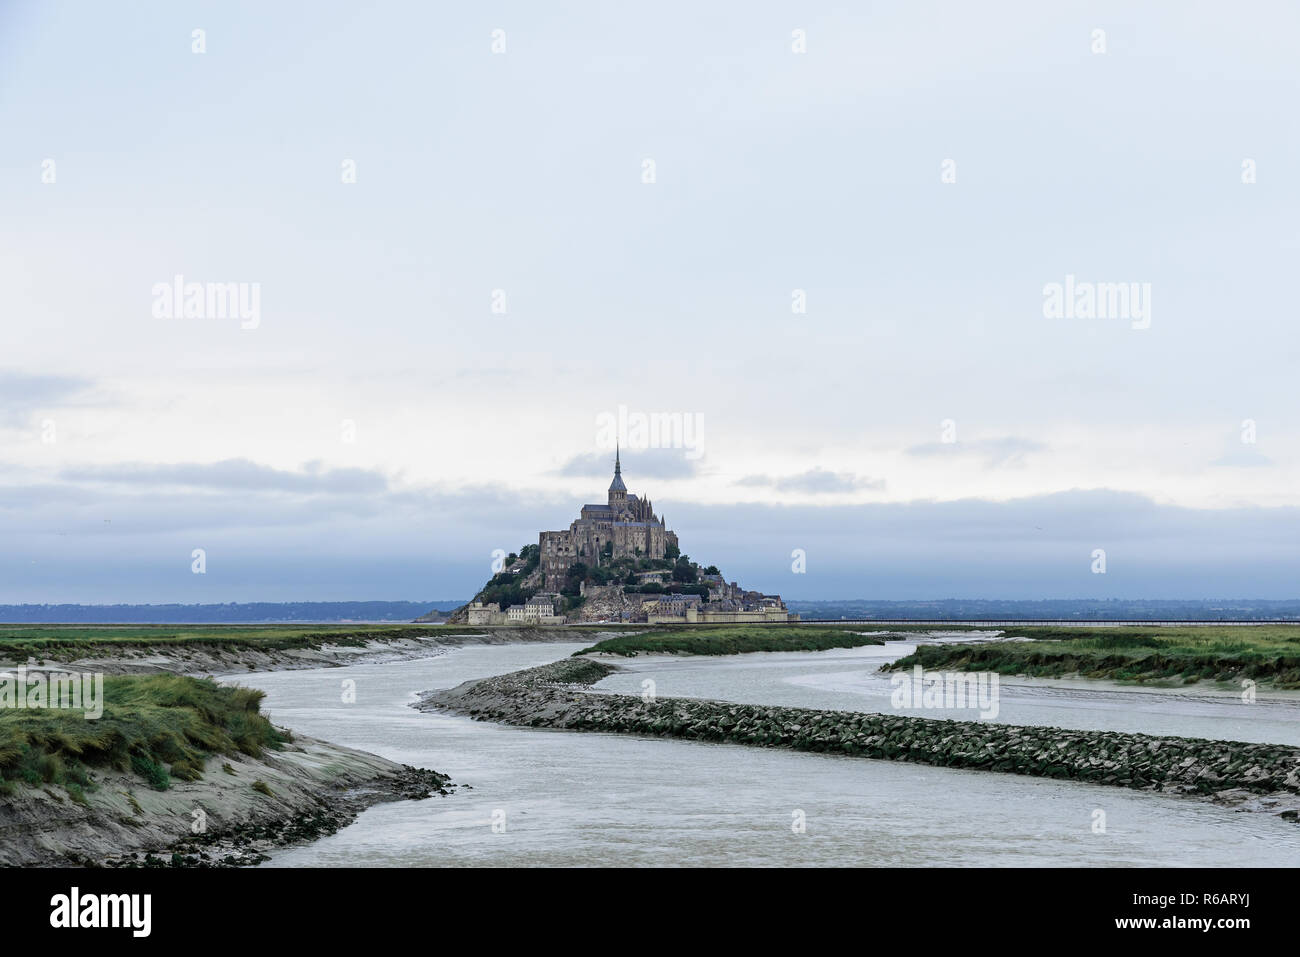 Mont Saint Michel abbey on the island with river, Normandy, Northern France, Europe at sunrise Stock Photo